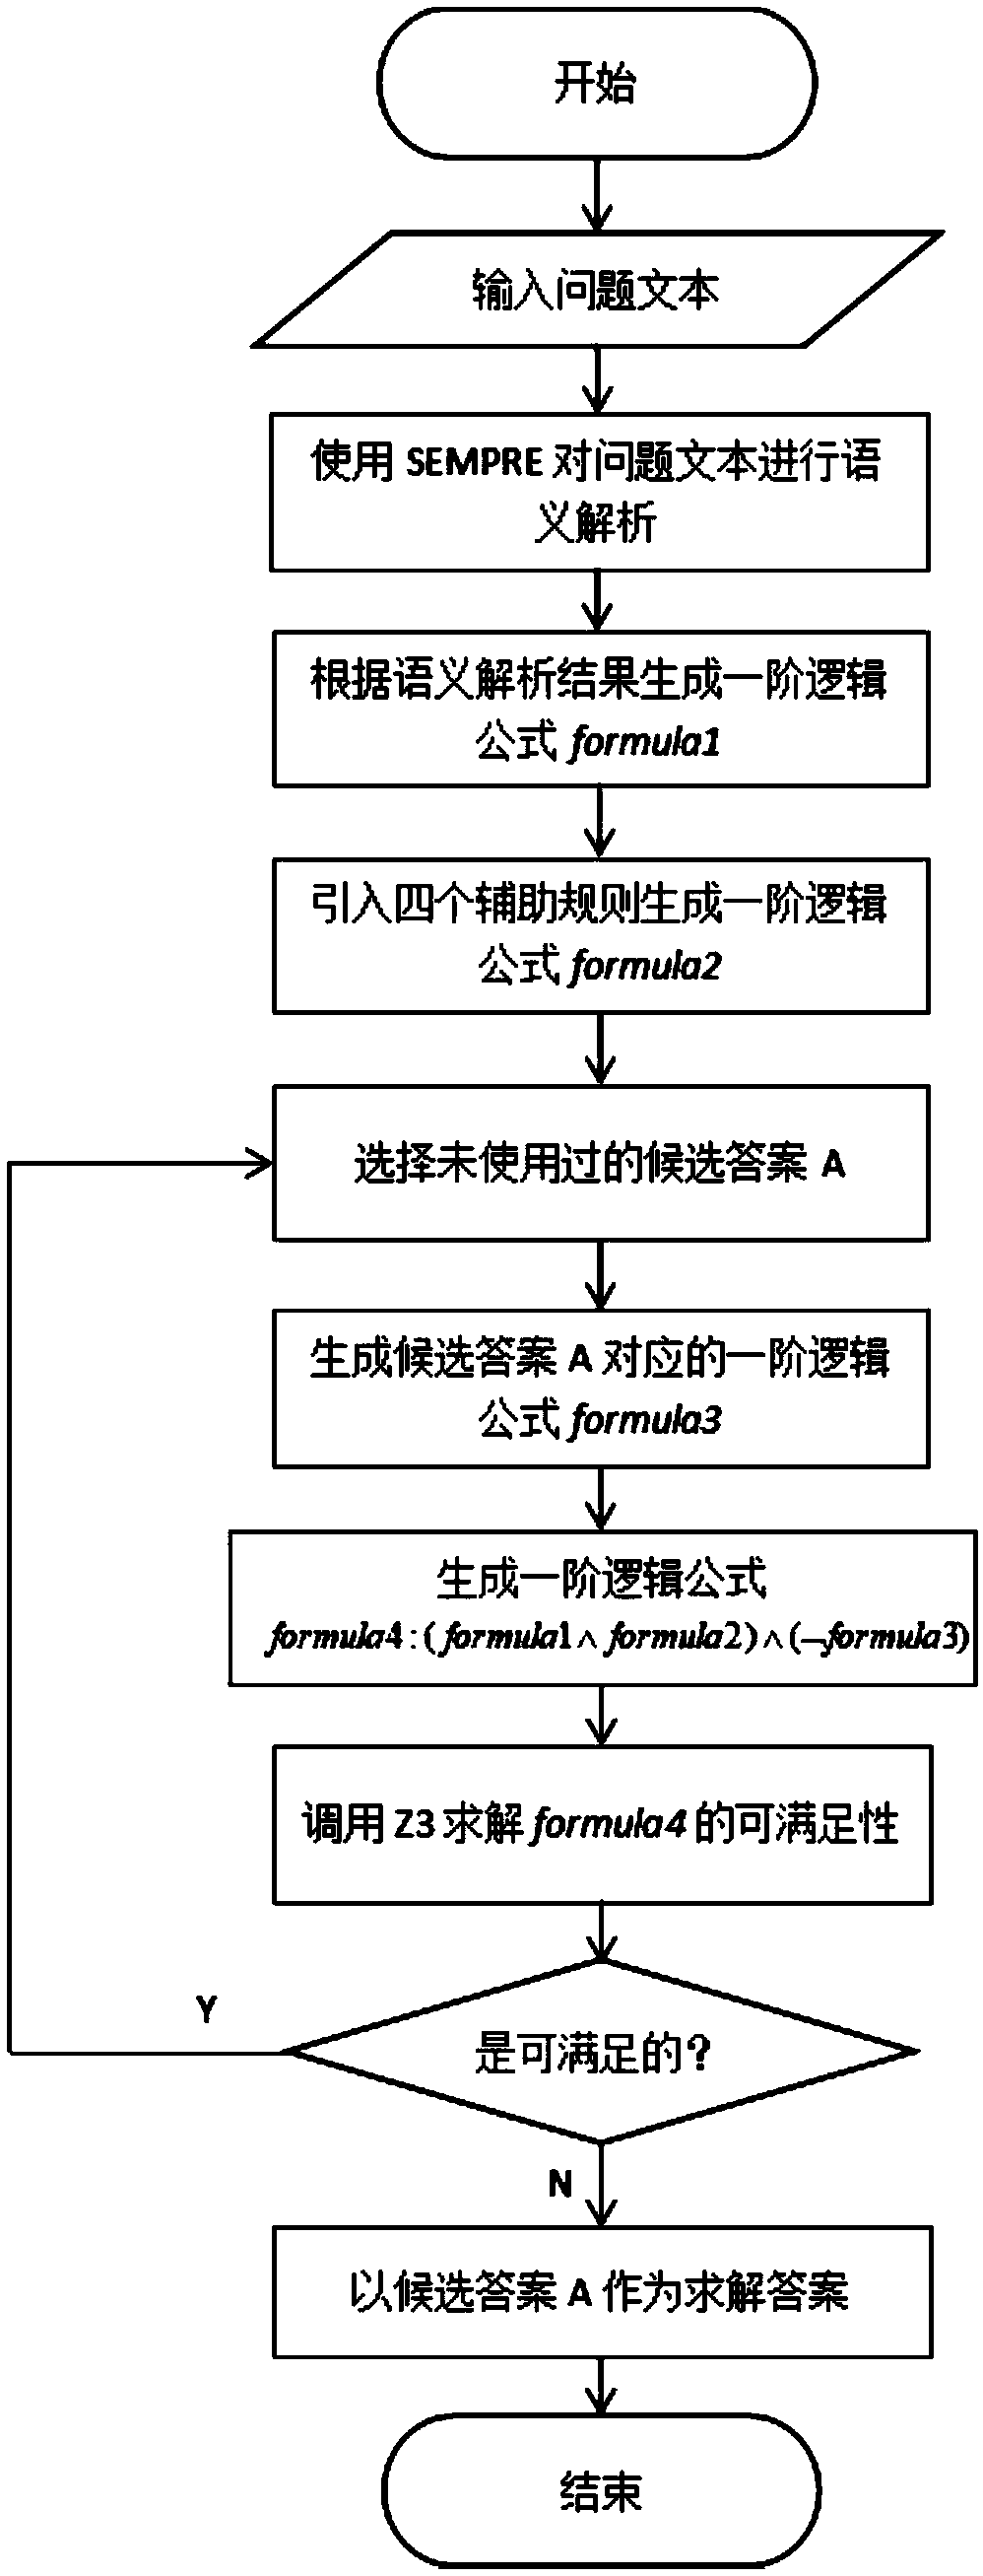 Method for solving reading comprehension question based on semantic analysis and SMT solution